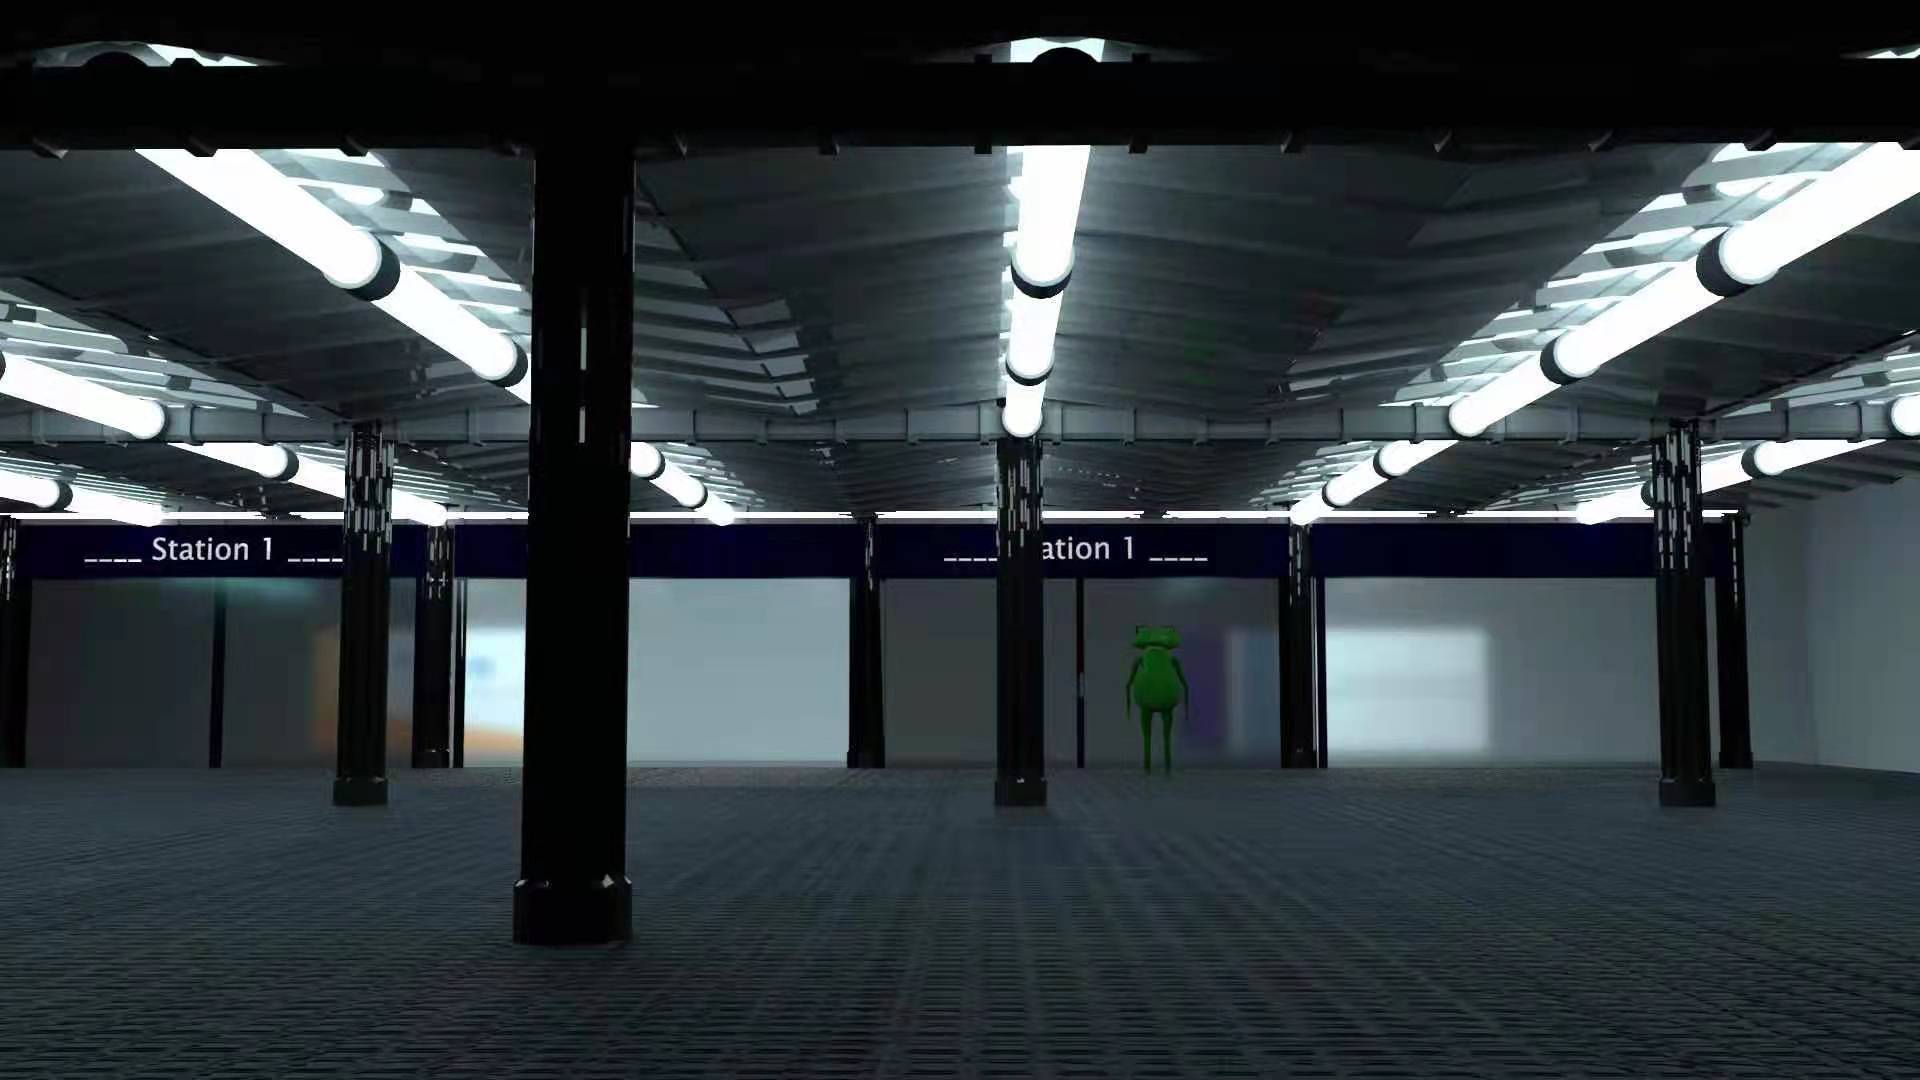 An image of a frog standing in the subway station. He's the only one in the station, lonely and sad.